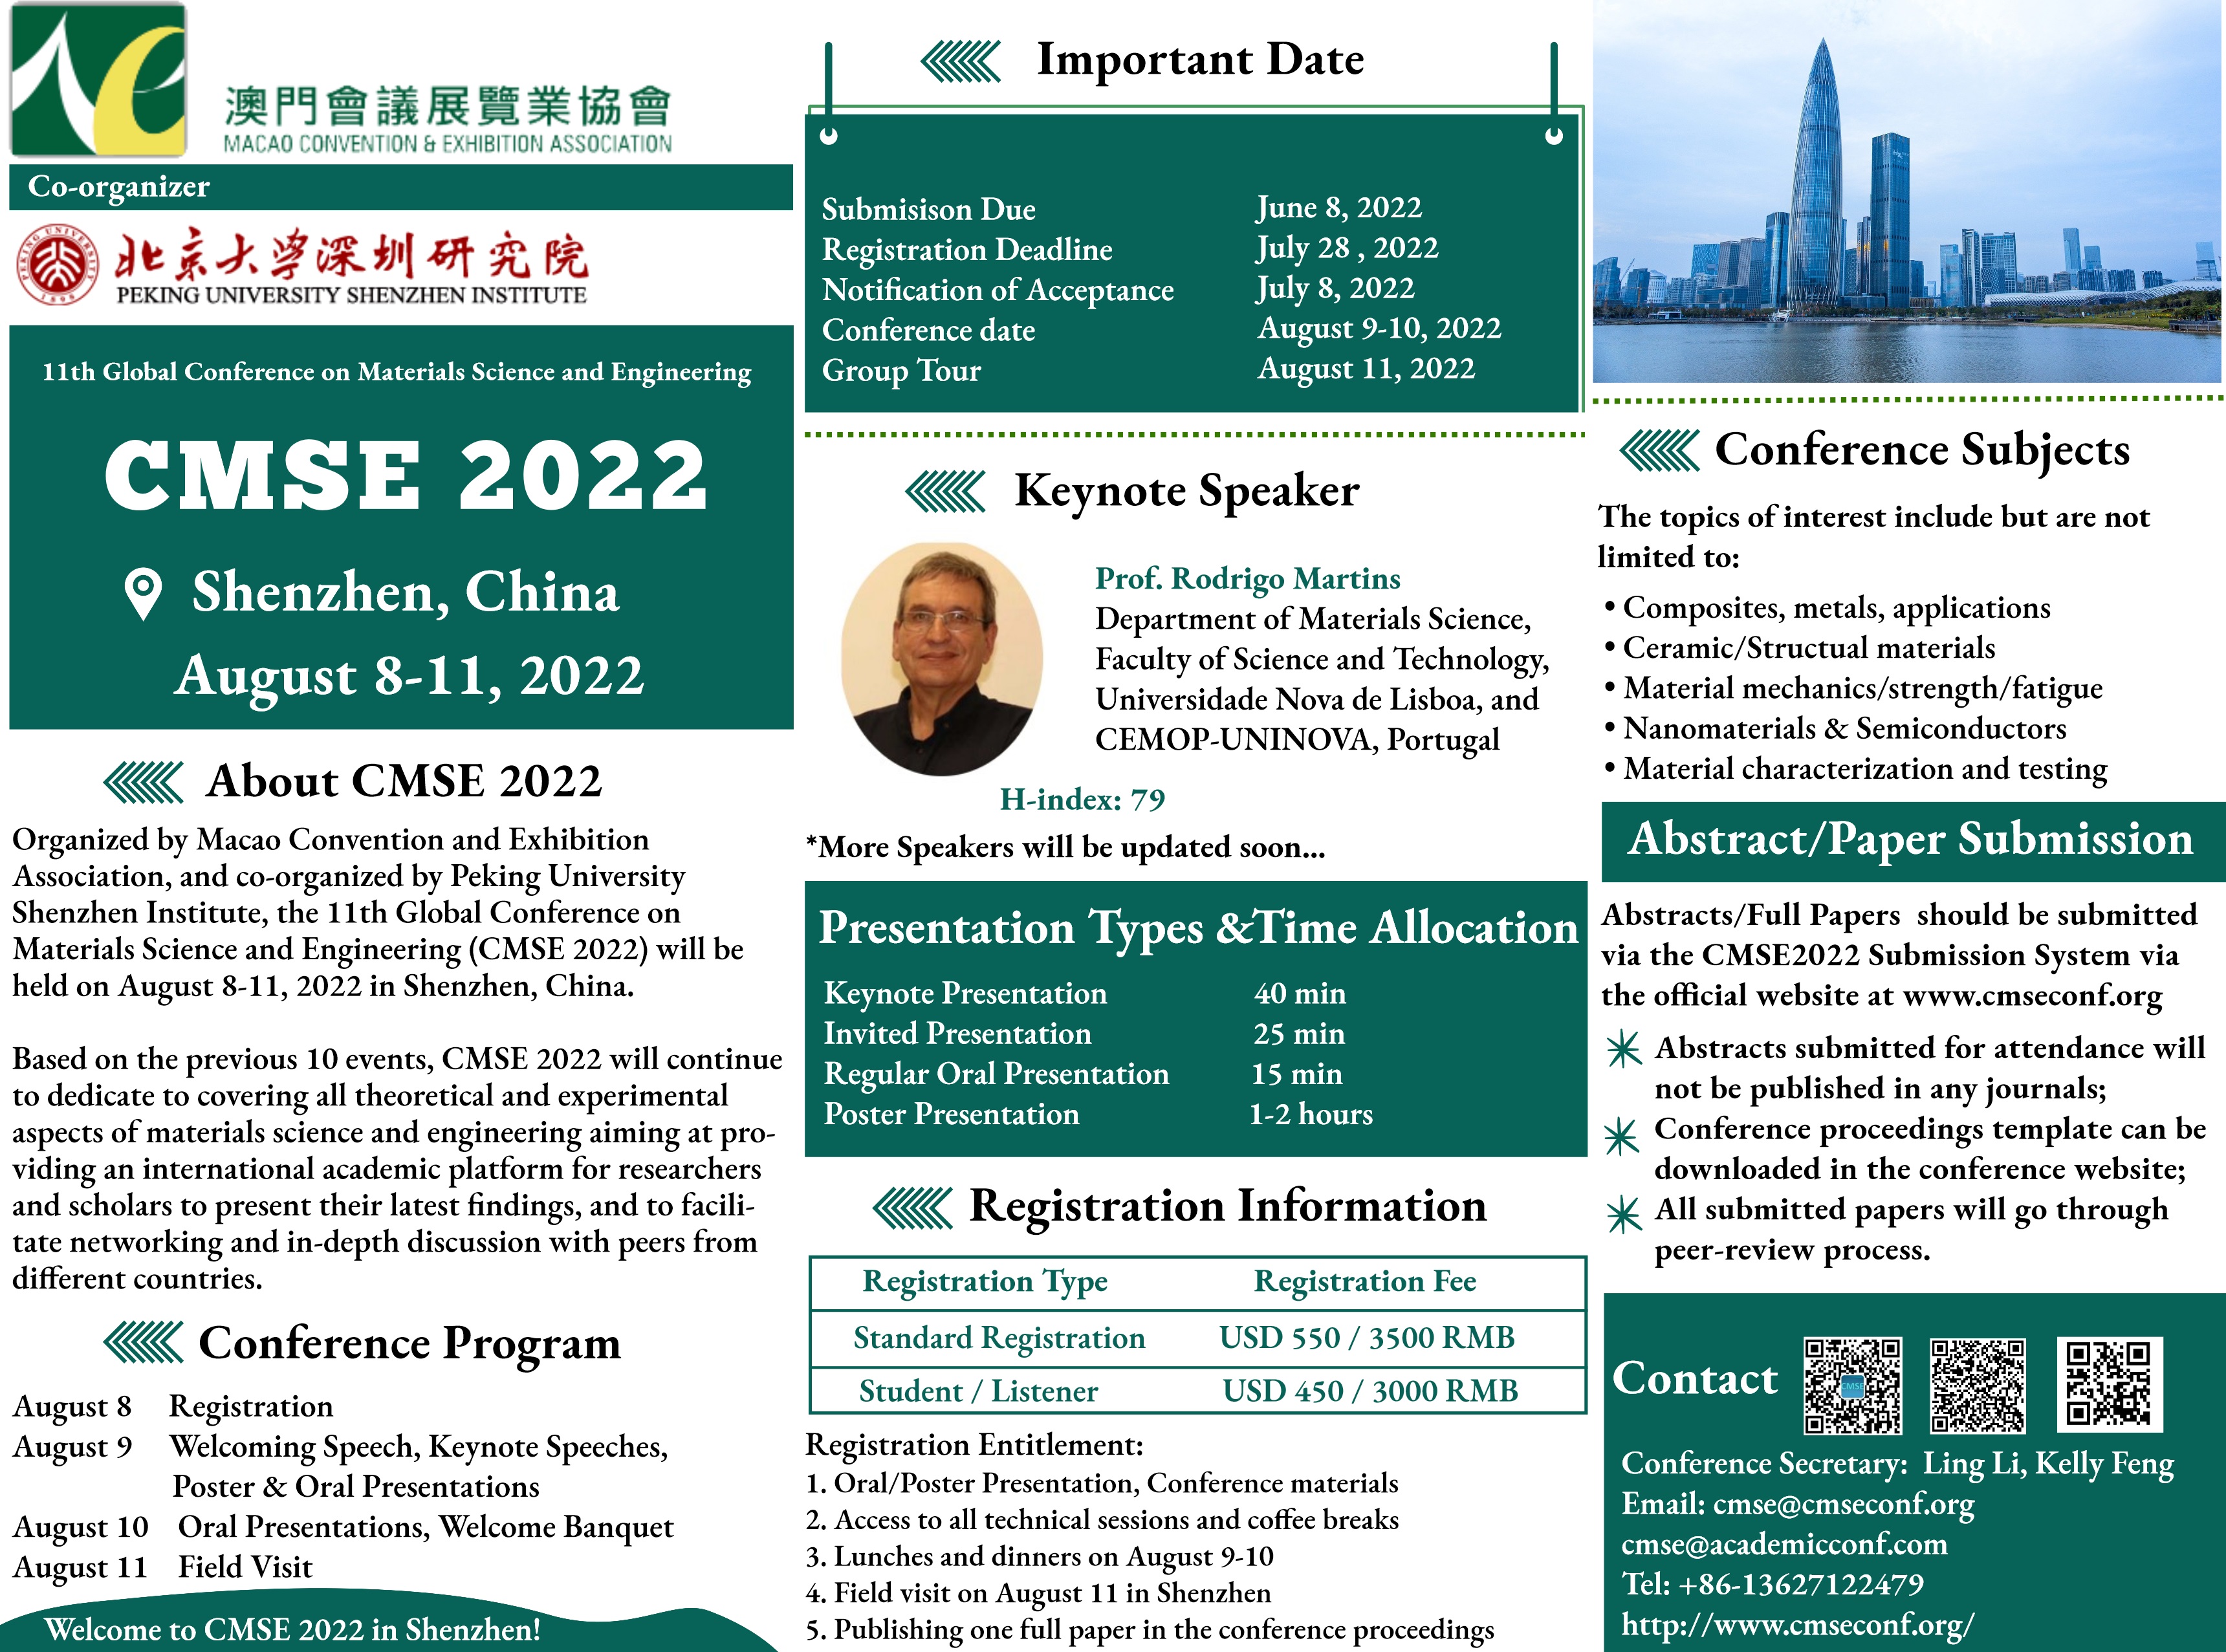 11th Global Conference on Materials Science and Engineering (CMSE 2022), Shenzhen, Guangdong, China